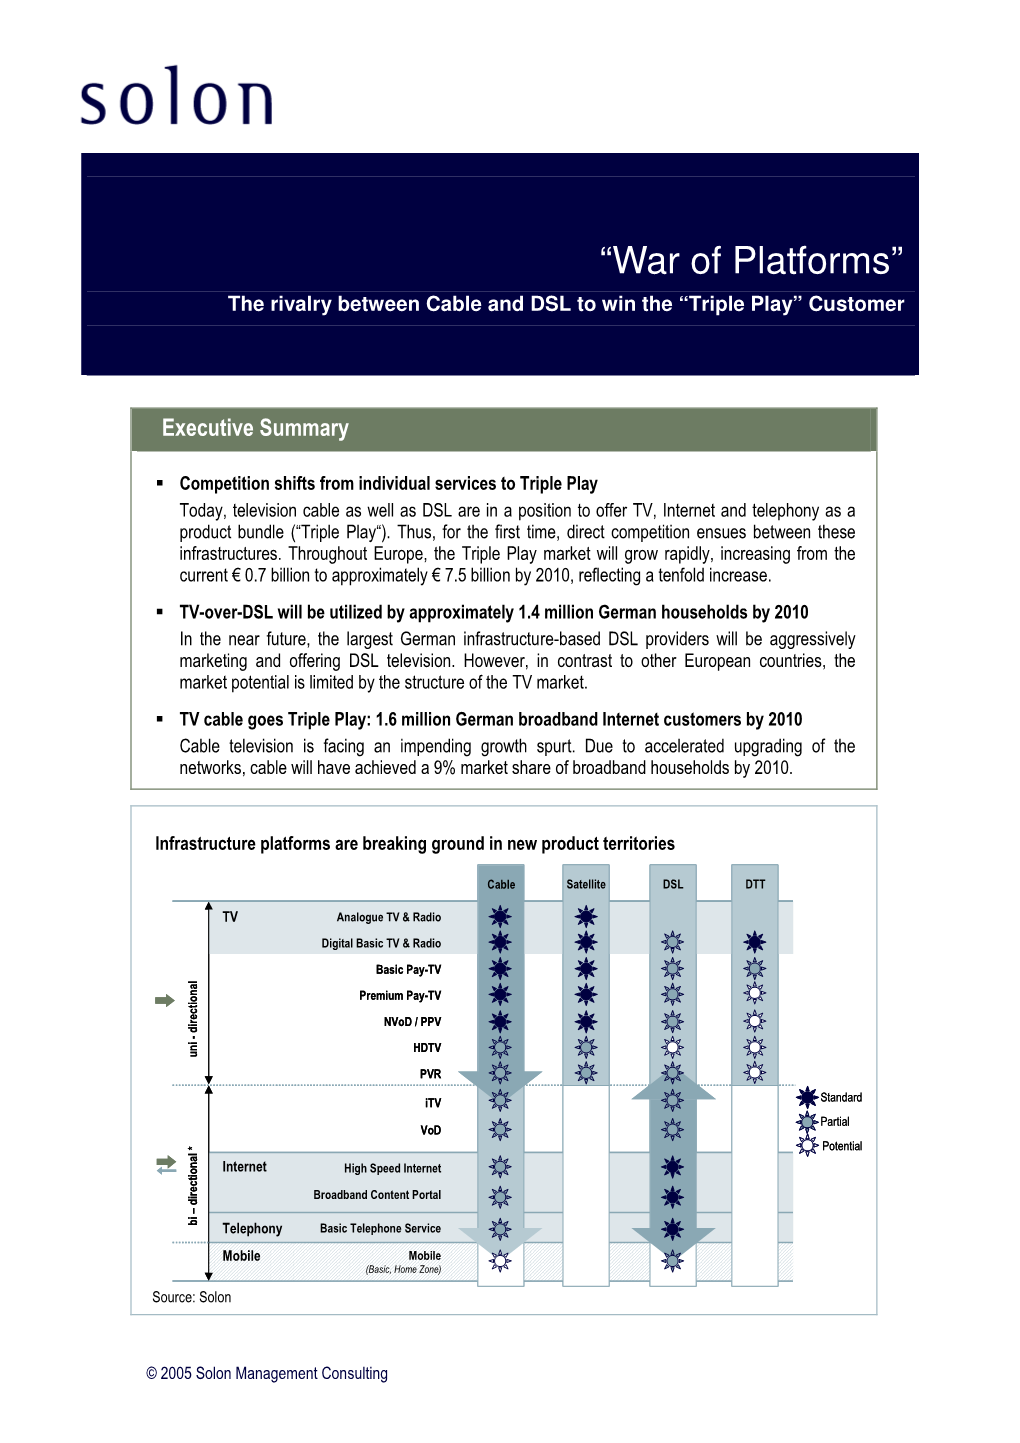 “War of Platforms” the Rivalry Between Cable and DSL to Win the “Triple Play” Customer